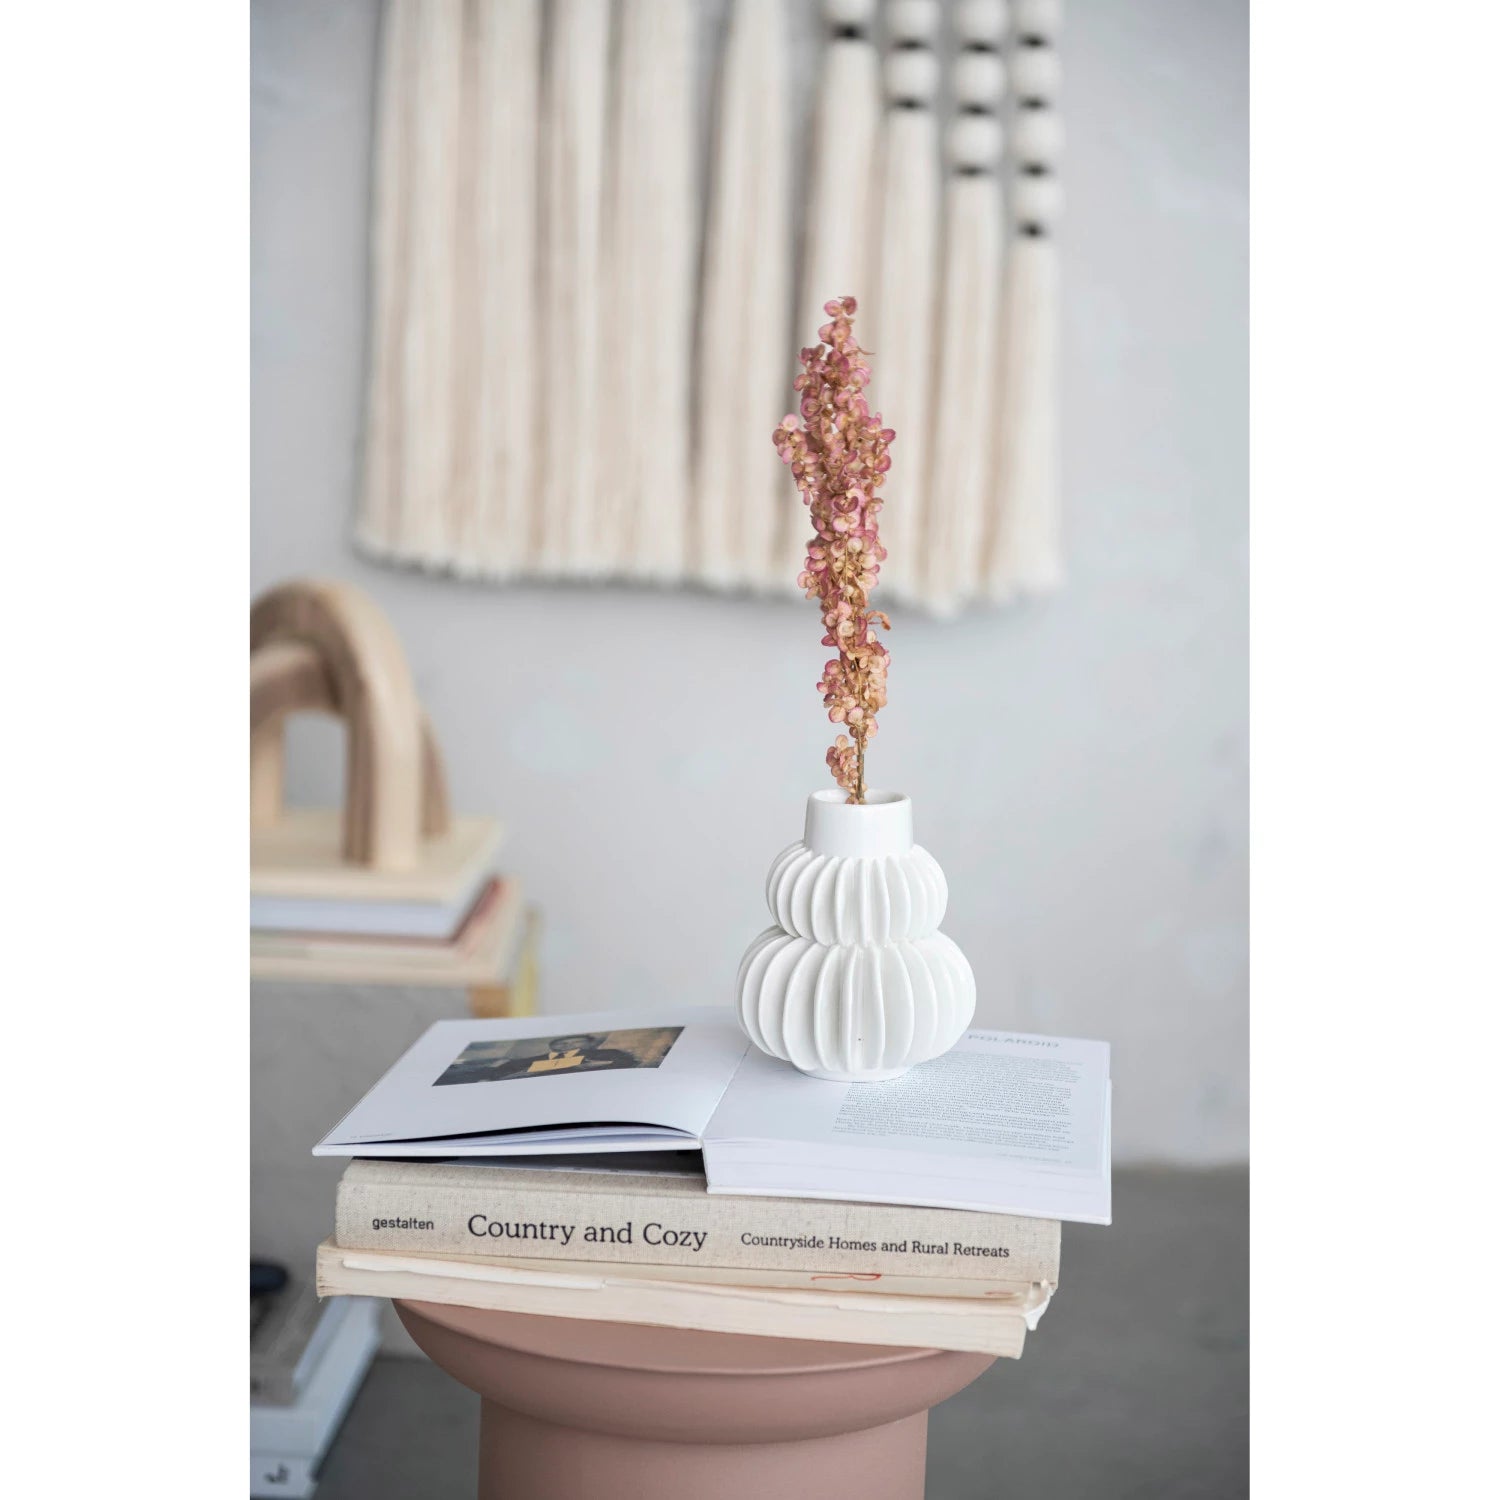 A stylish white Bloomingville Pleated Vase with a textured design holds dried pink flowers, placed on an open book titled "Bungalow and Cozy". The setting includes a neutral-toned background with a woven wall piece.